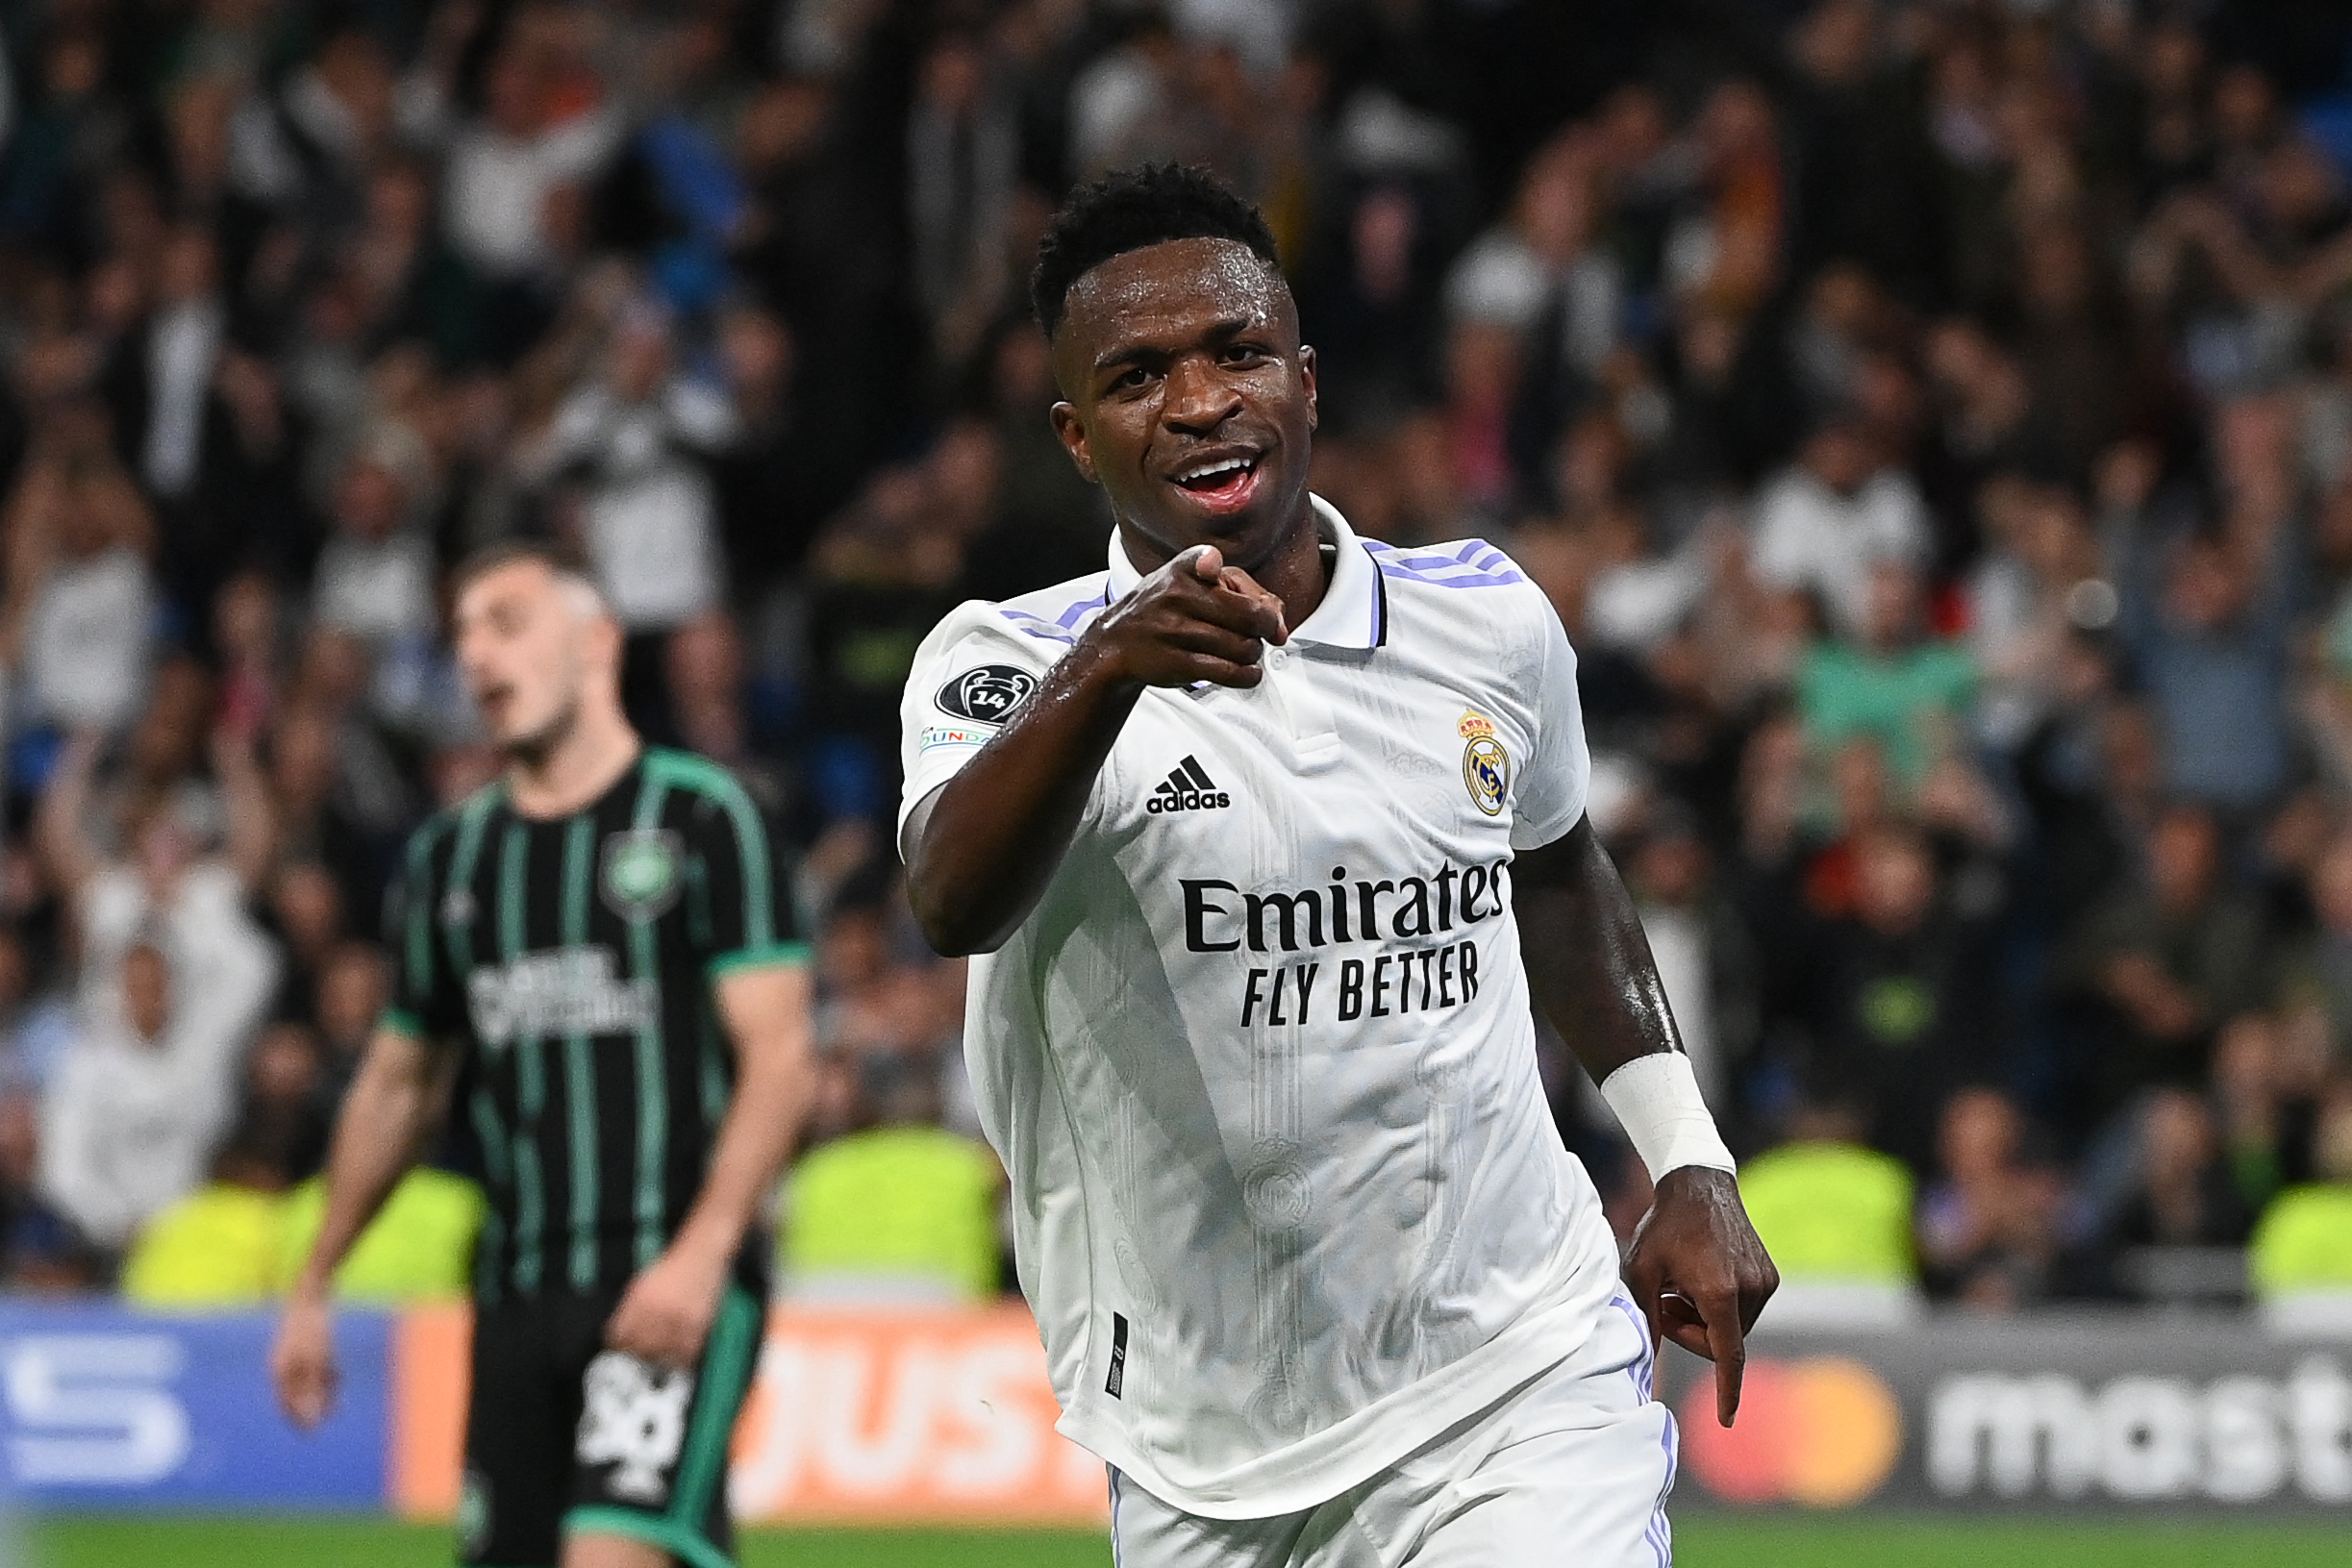 Manchester United suffer a huge transfer blow as Real Madrid are willing to keep Vinicius Junior regardless of the offer size